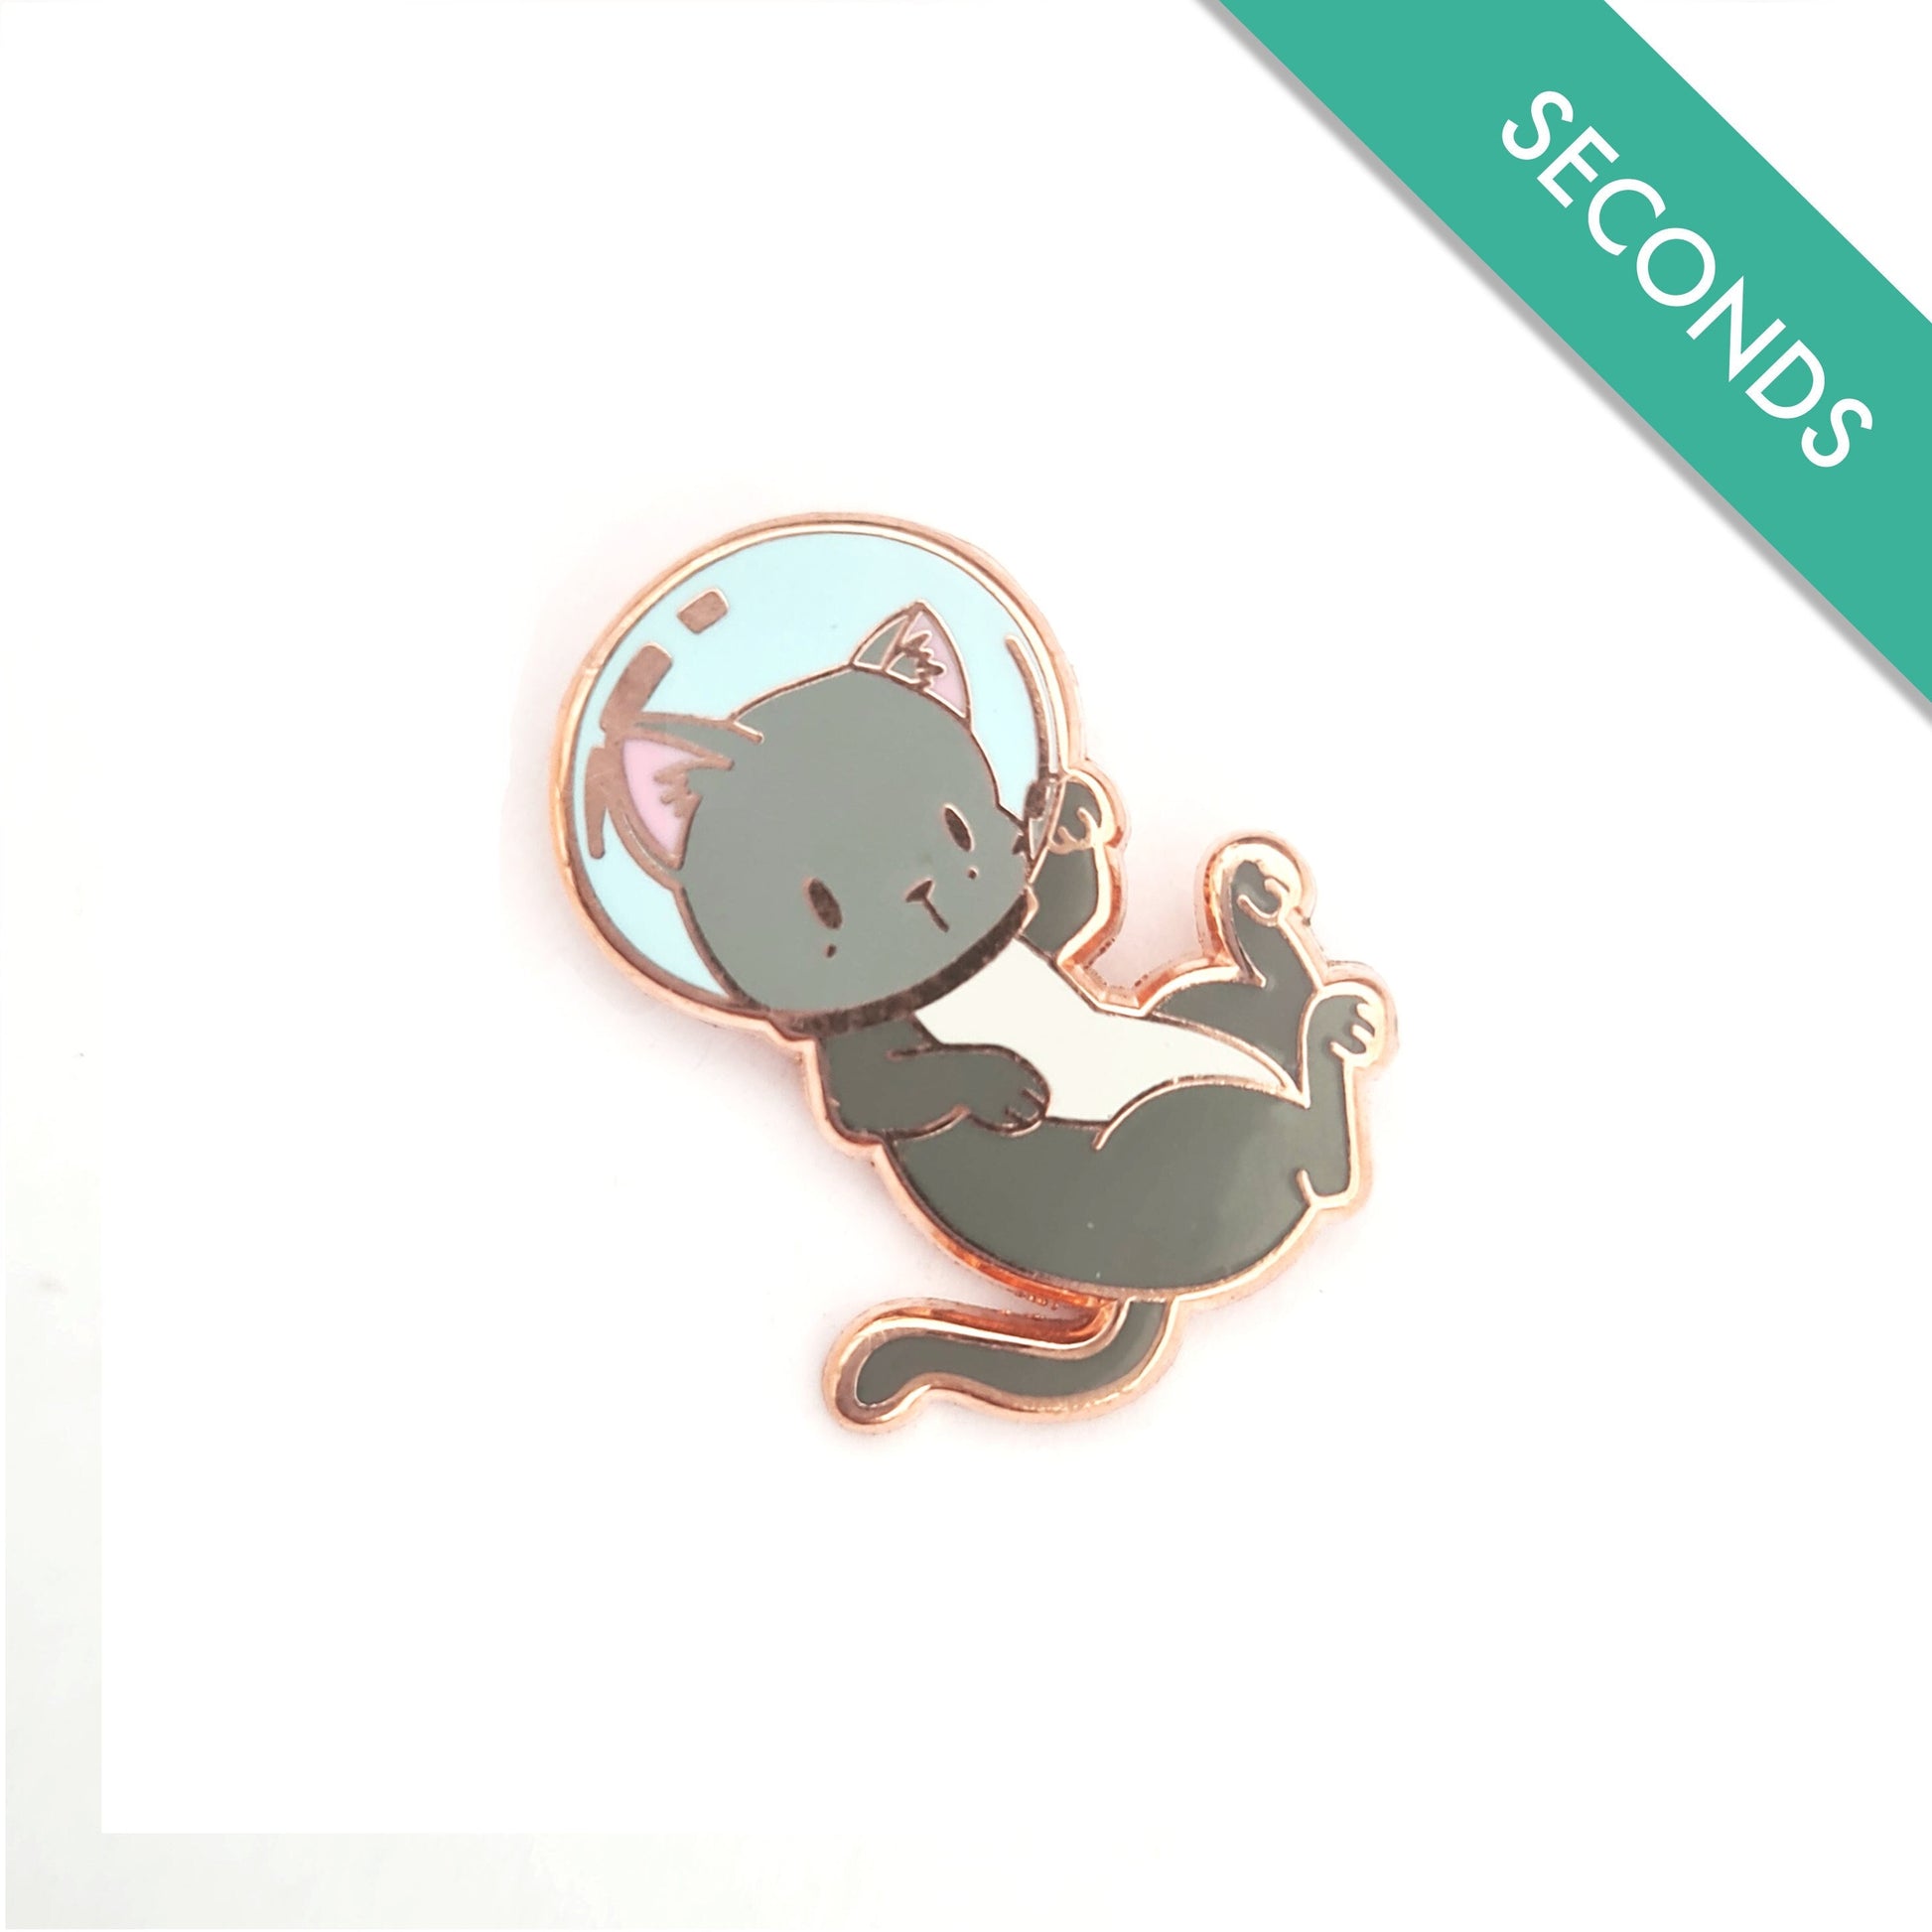 Space Kitty - Pin Seconds - Small Enamel Pin